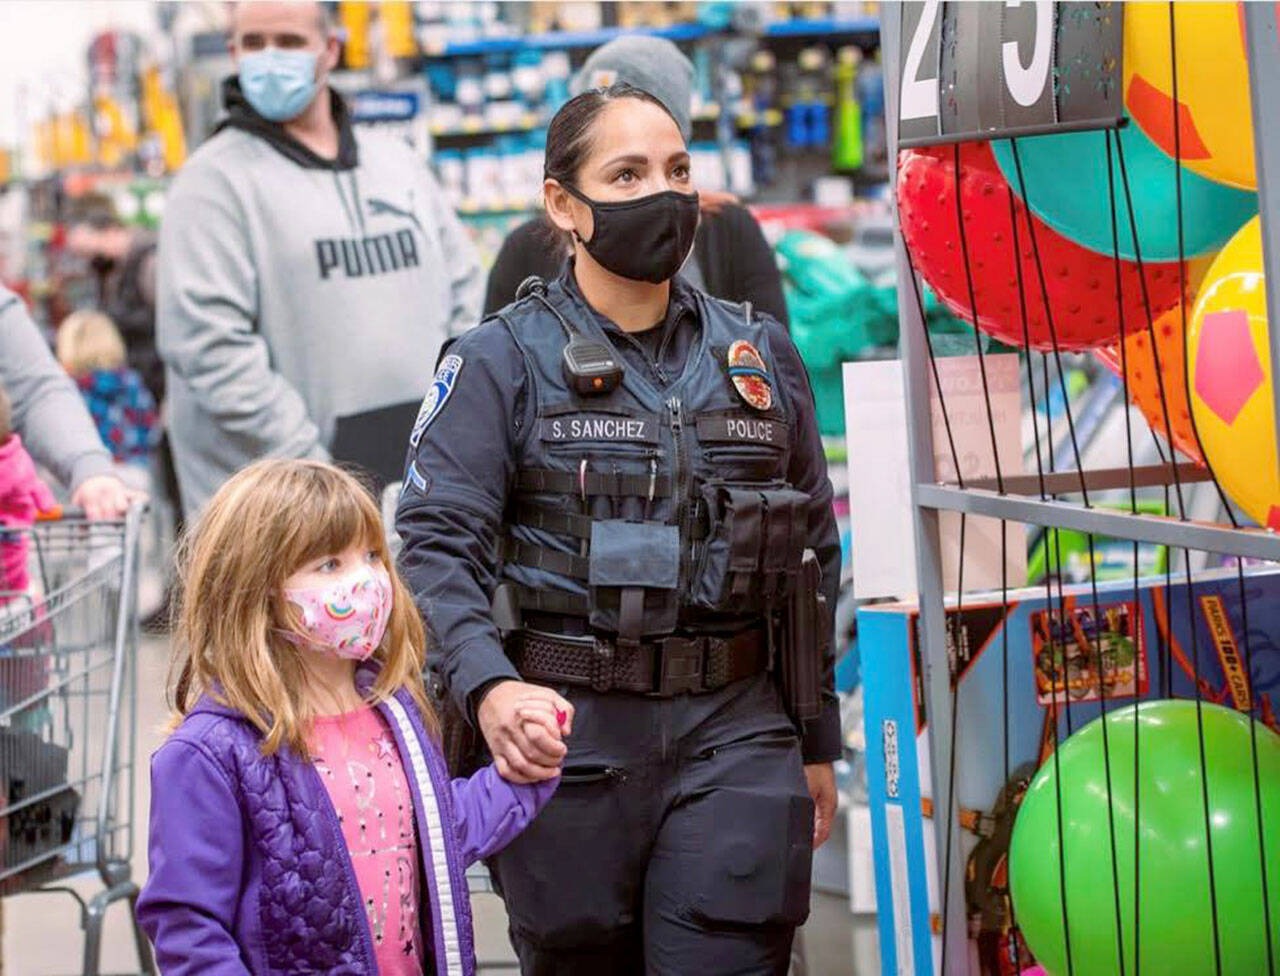 Port Angeles Police Officer Swift Sanchez with a child during a holiday shopping event. The police department is among several agencies in a partnership focused on resiliency throughout October. (Jesse Major Photography)